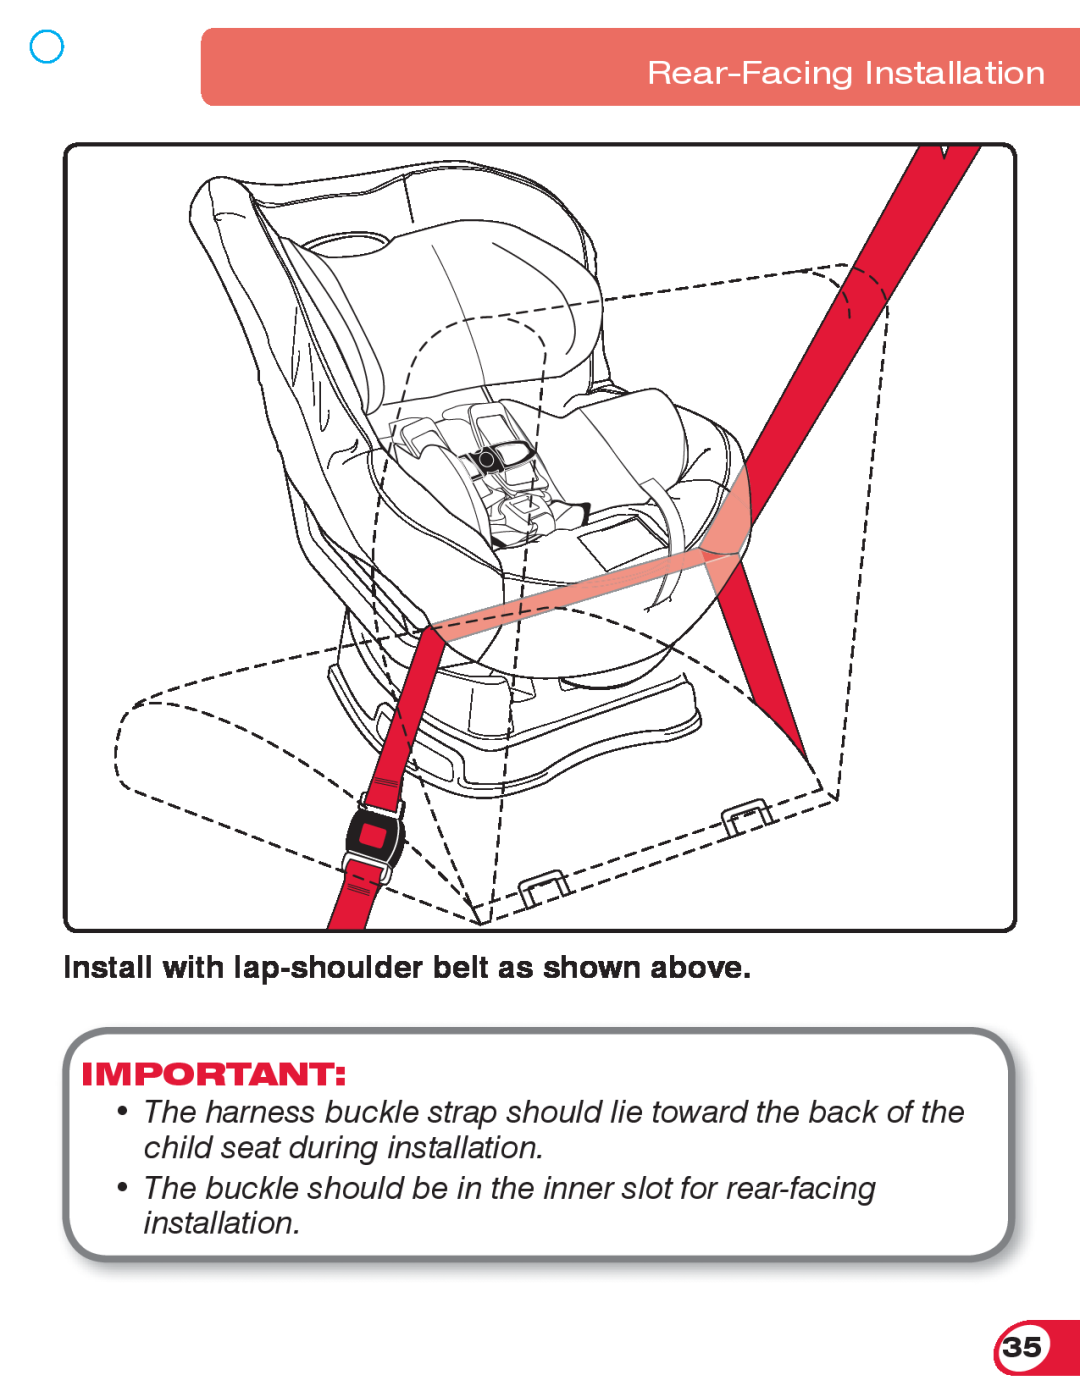 Britax 70 CS manual Install with lap-shoulder belt as shown above, Rear-Facing Installation 